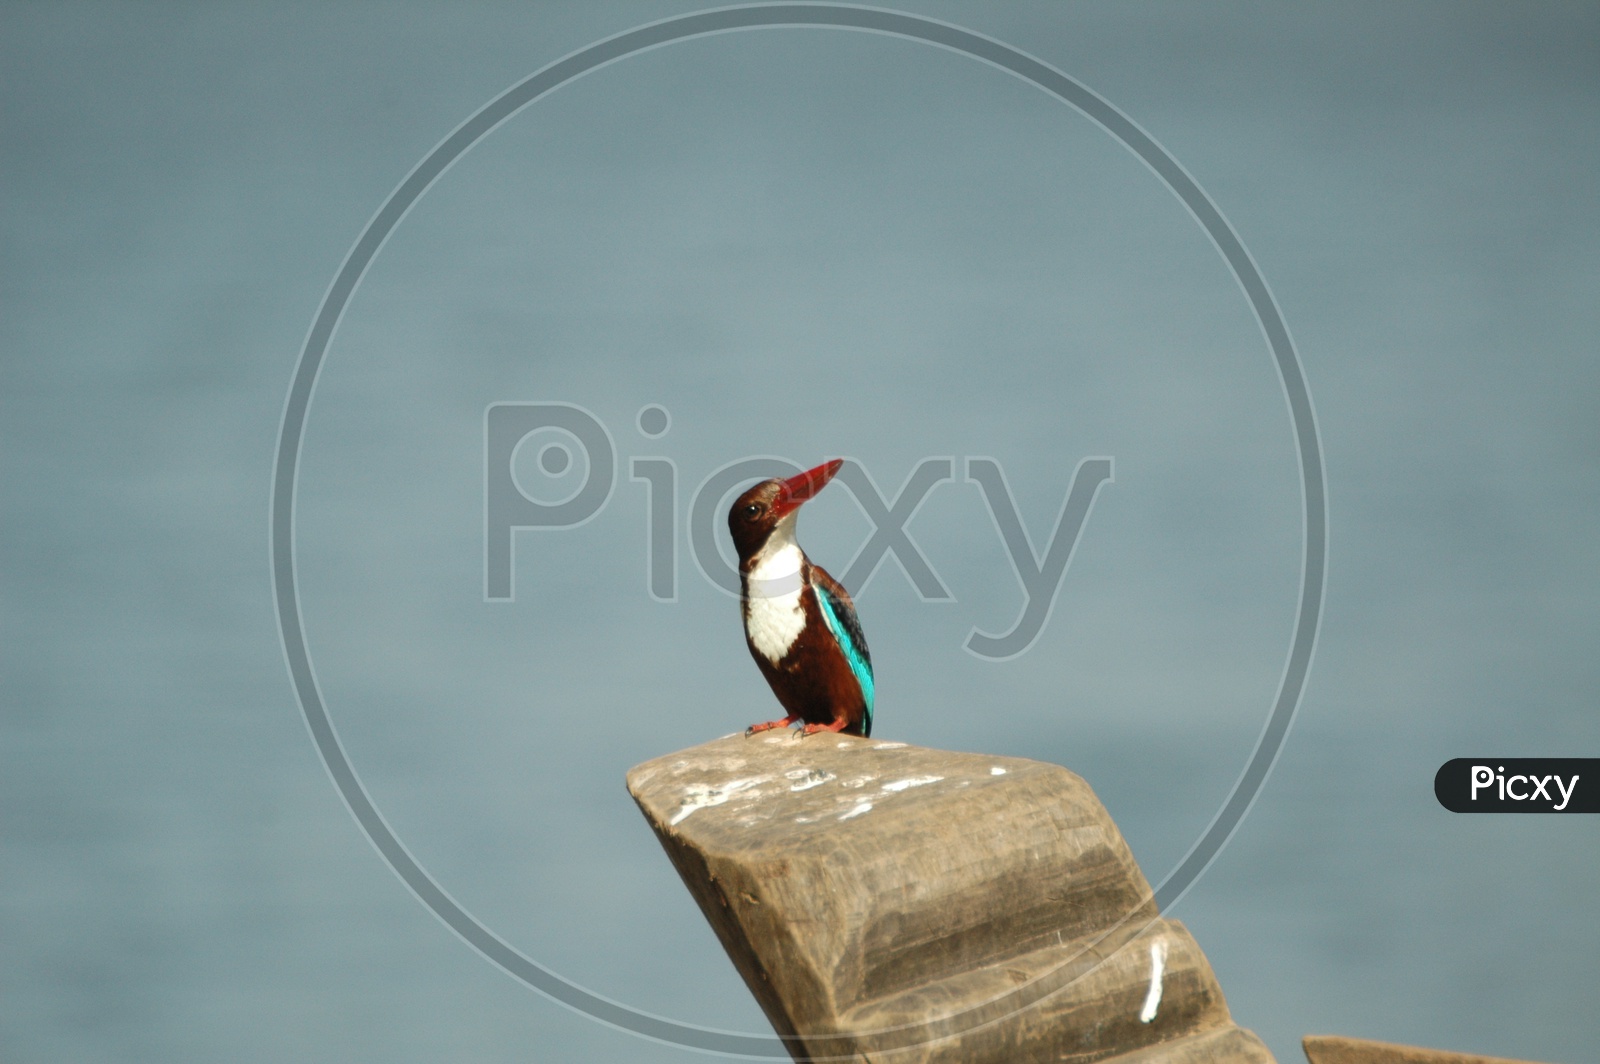 White throated kingfisher, also known as white breasted kingfisher